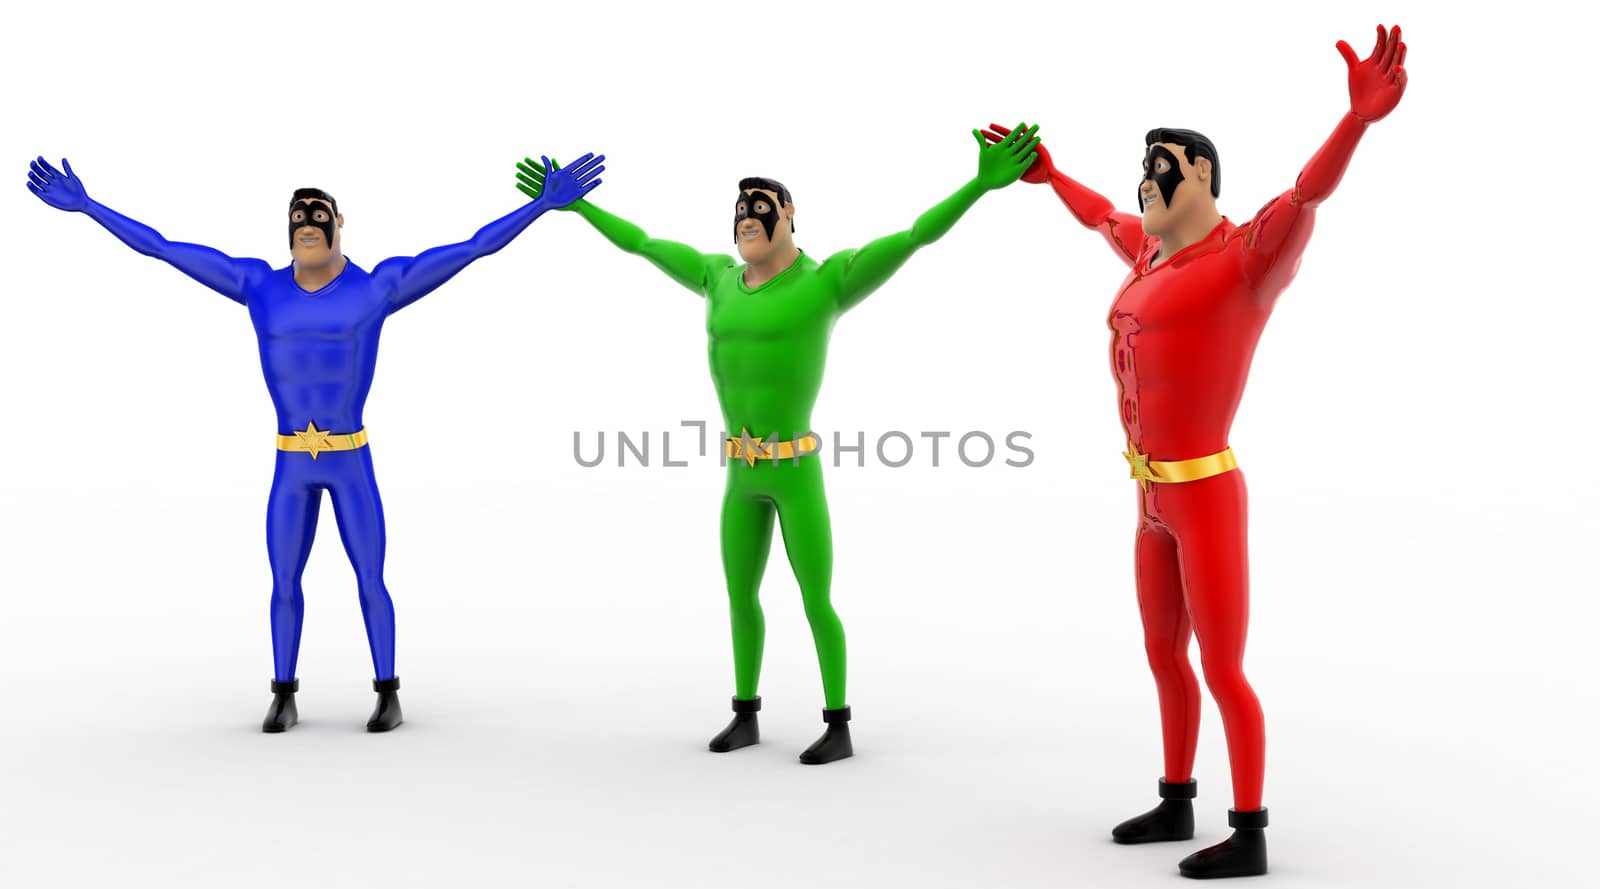 3d three pneguins happy and hands up concept by touchmenithin@gmail.com